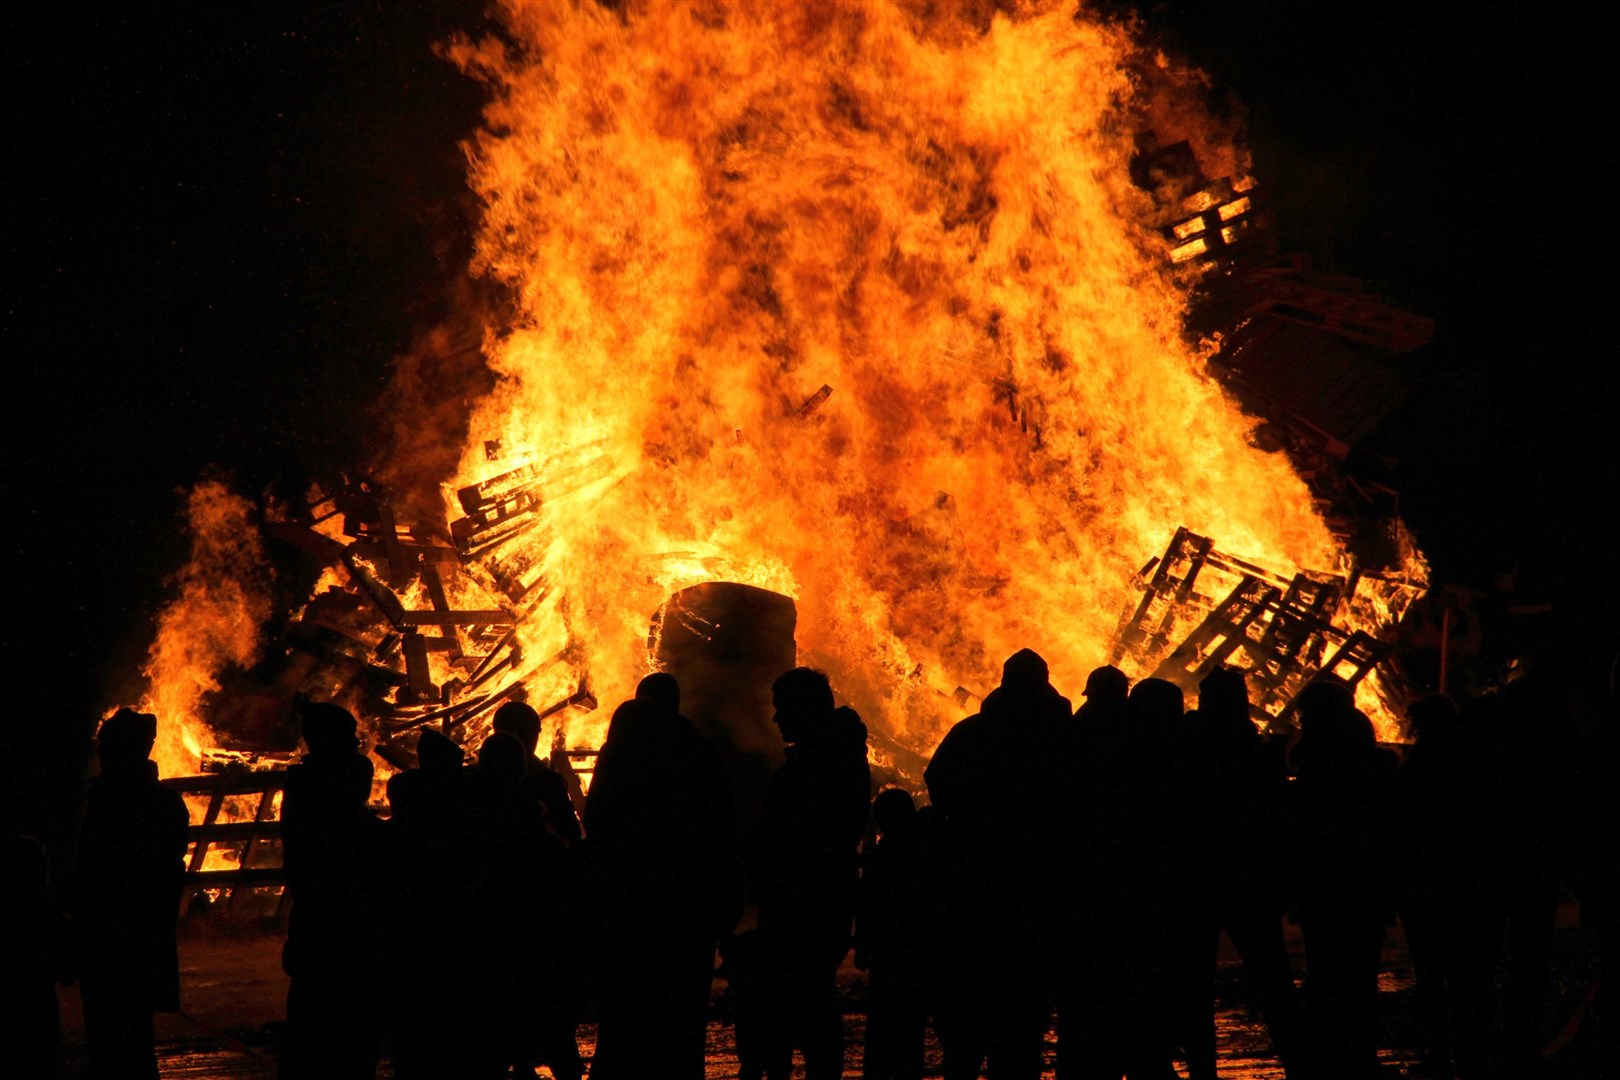 The run-up to bonfire night on November 5 is the busiest time of year for the service which has issued a plea to the public.